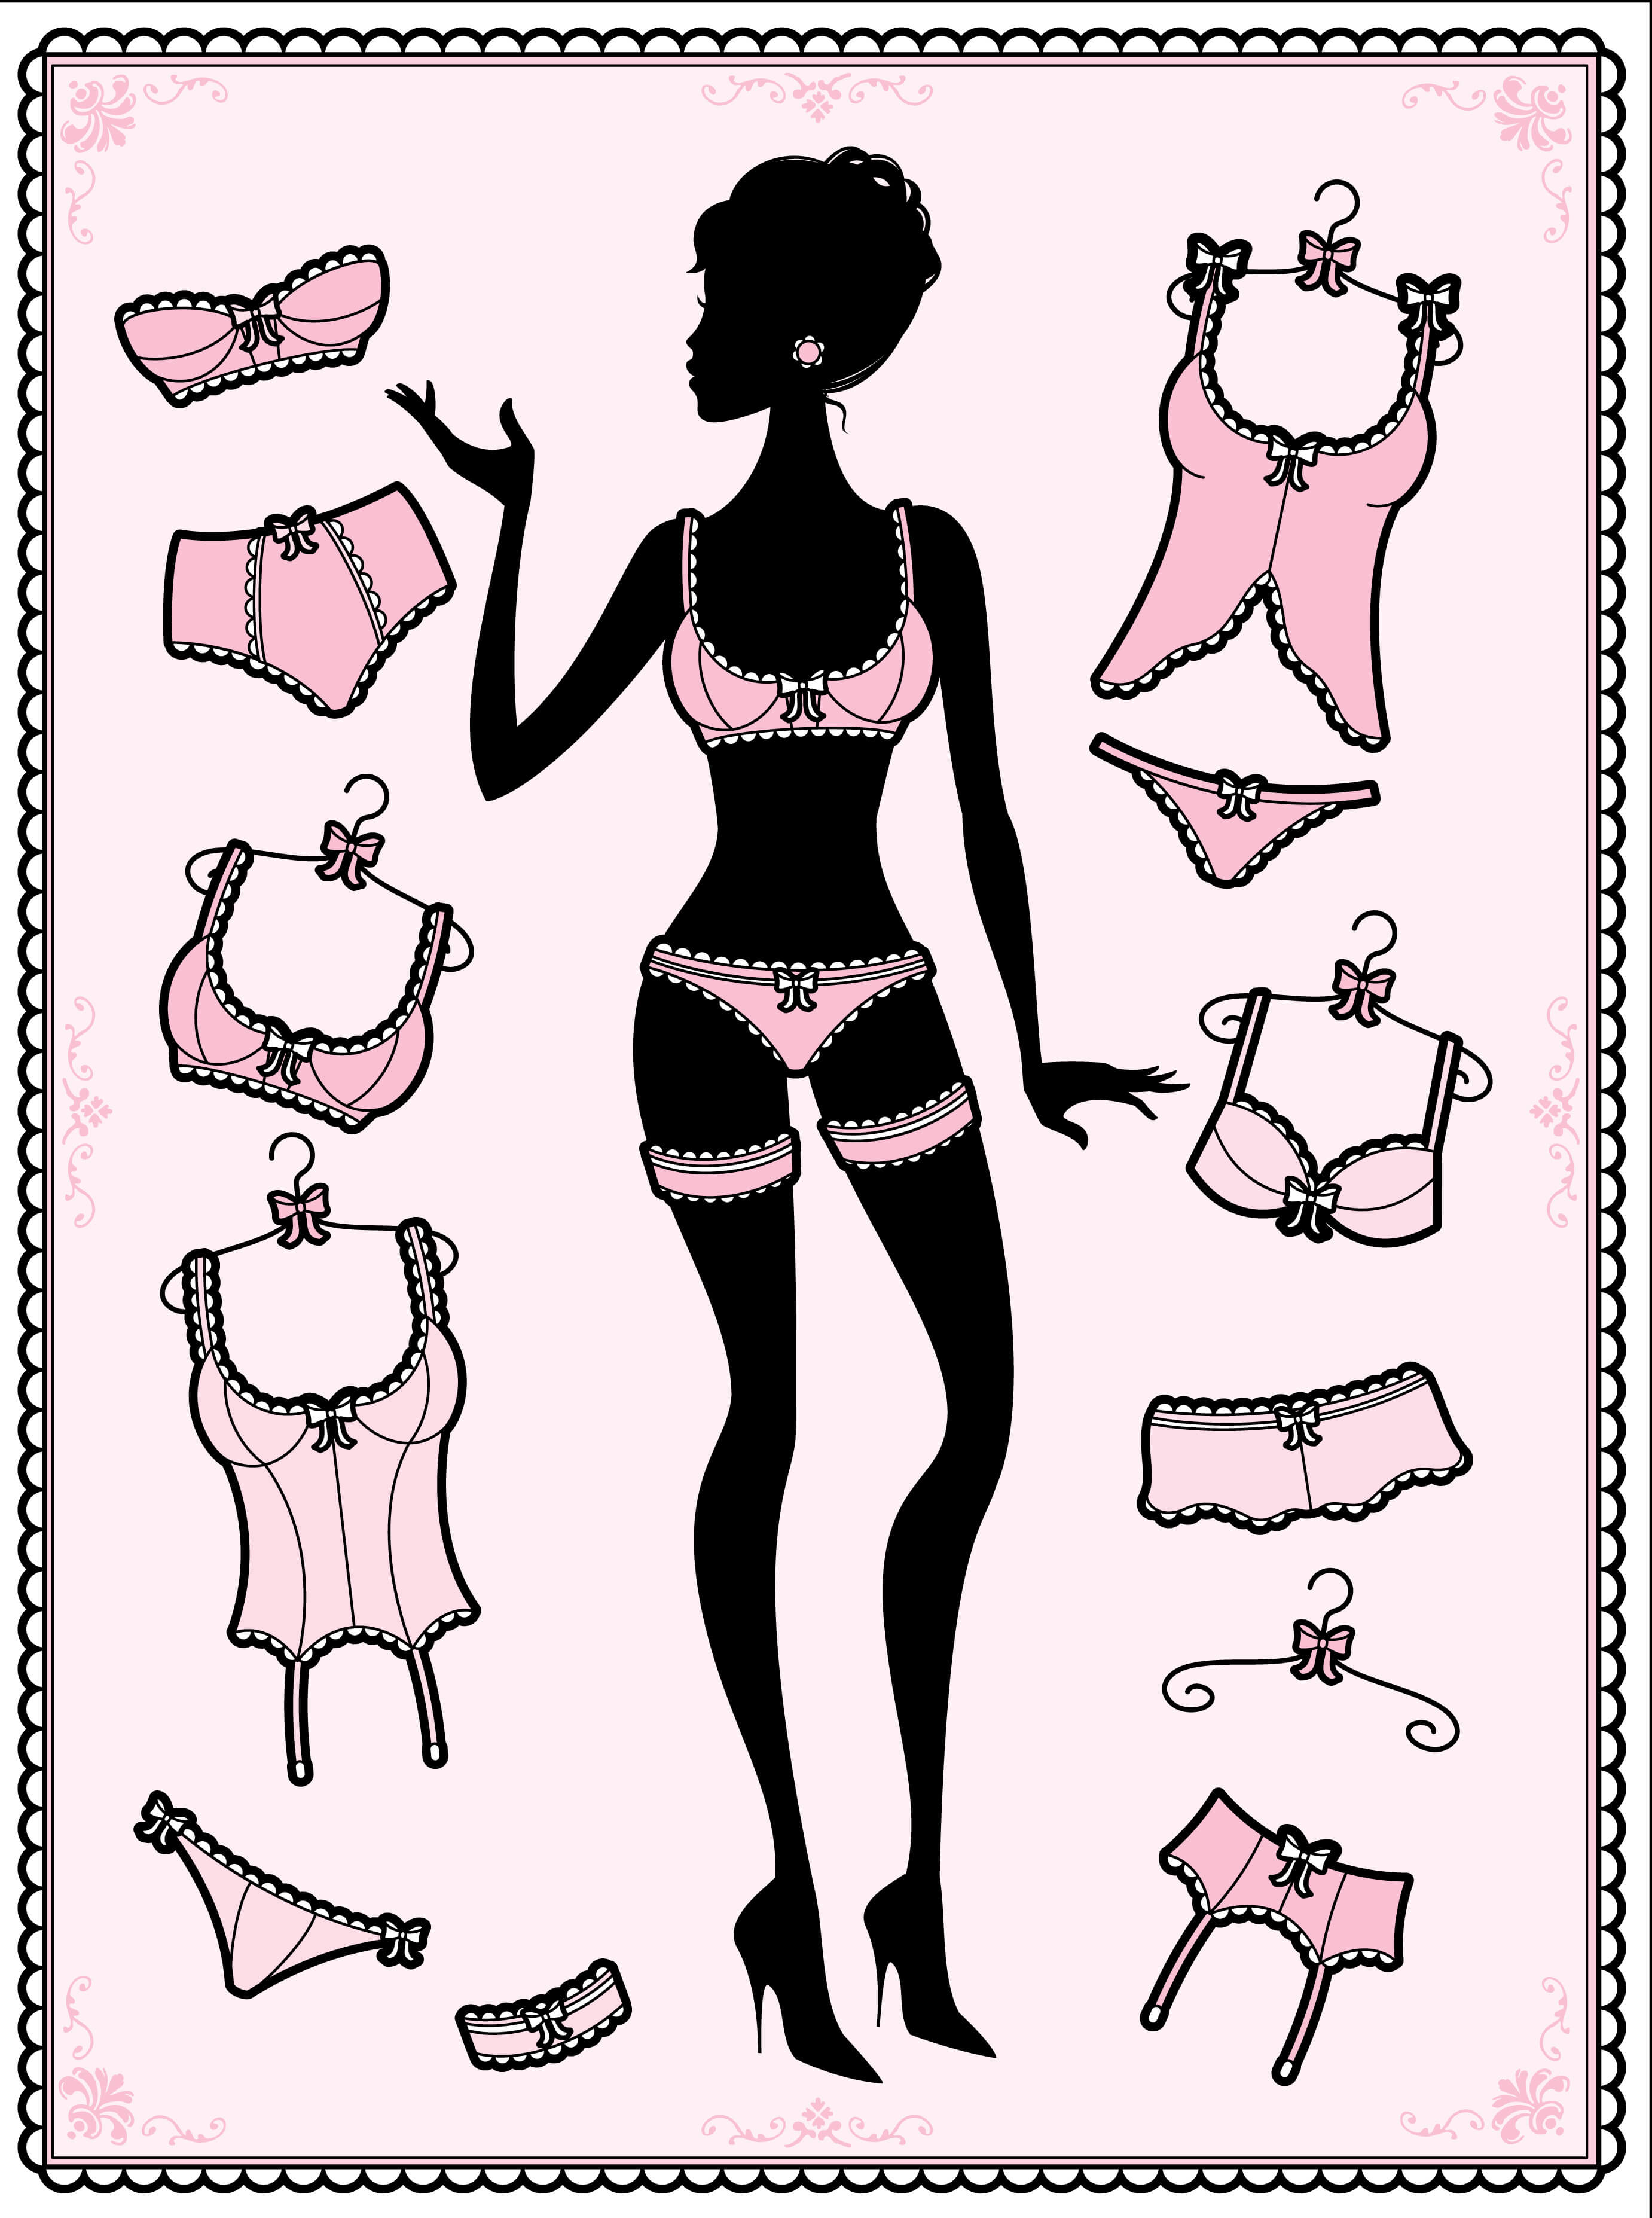 What are the benefits of wearing matching bras and panties